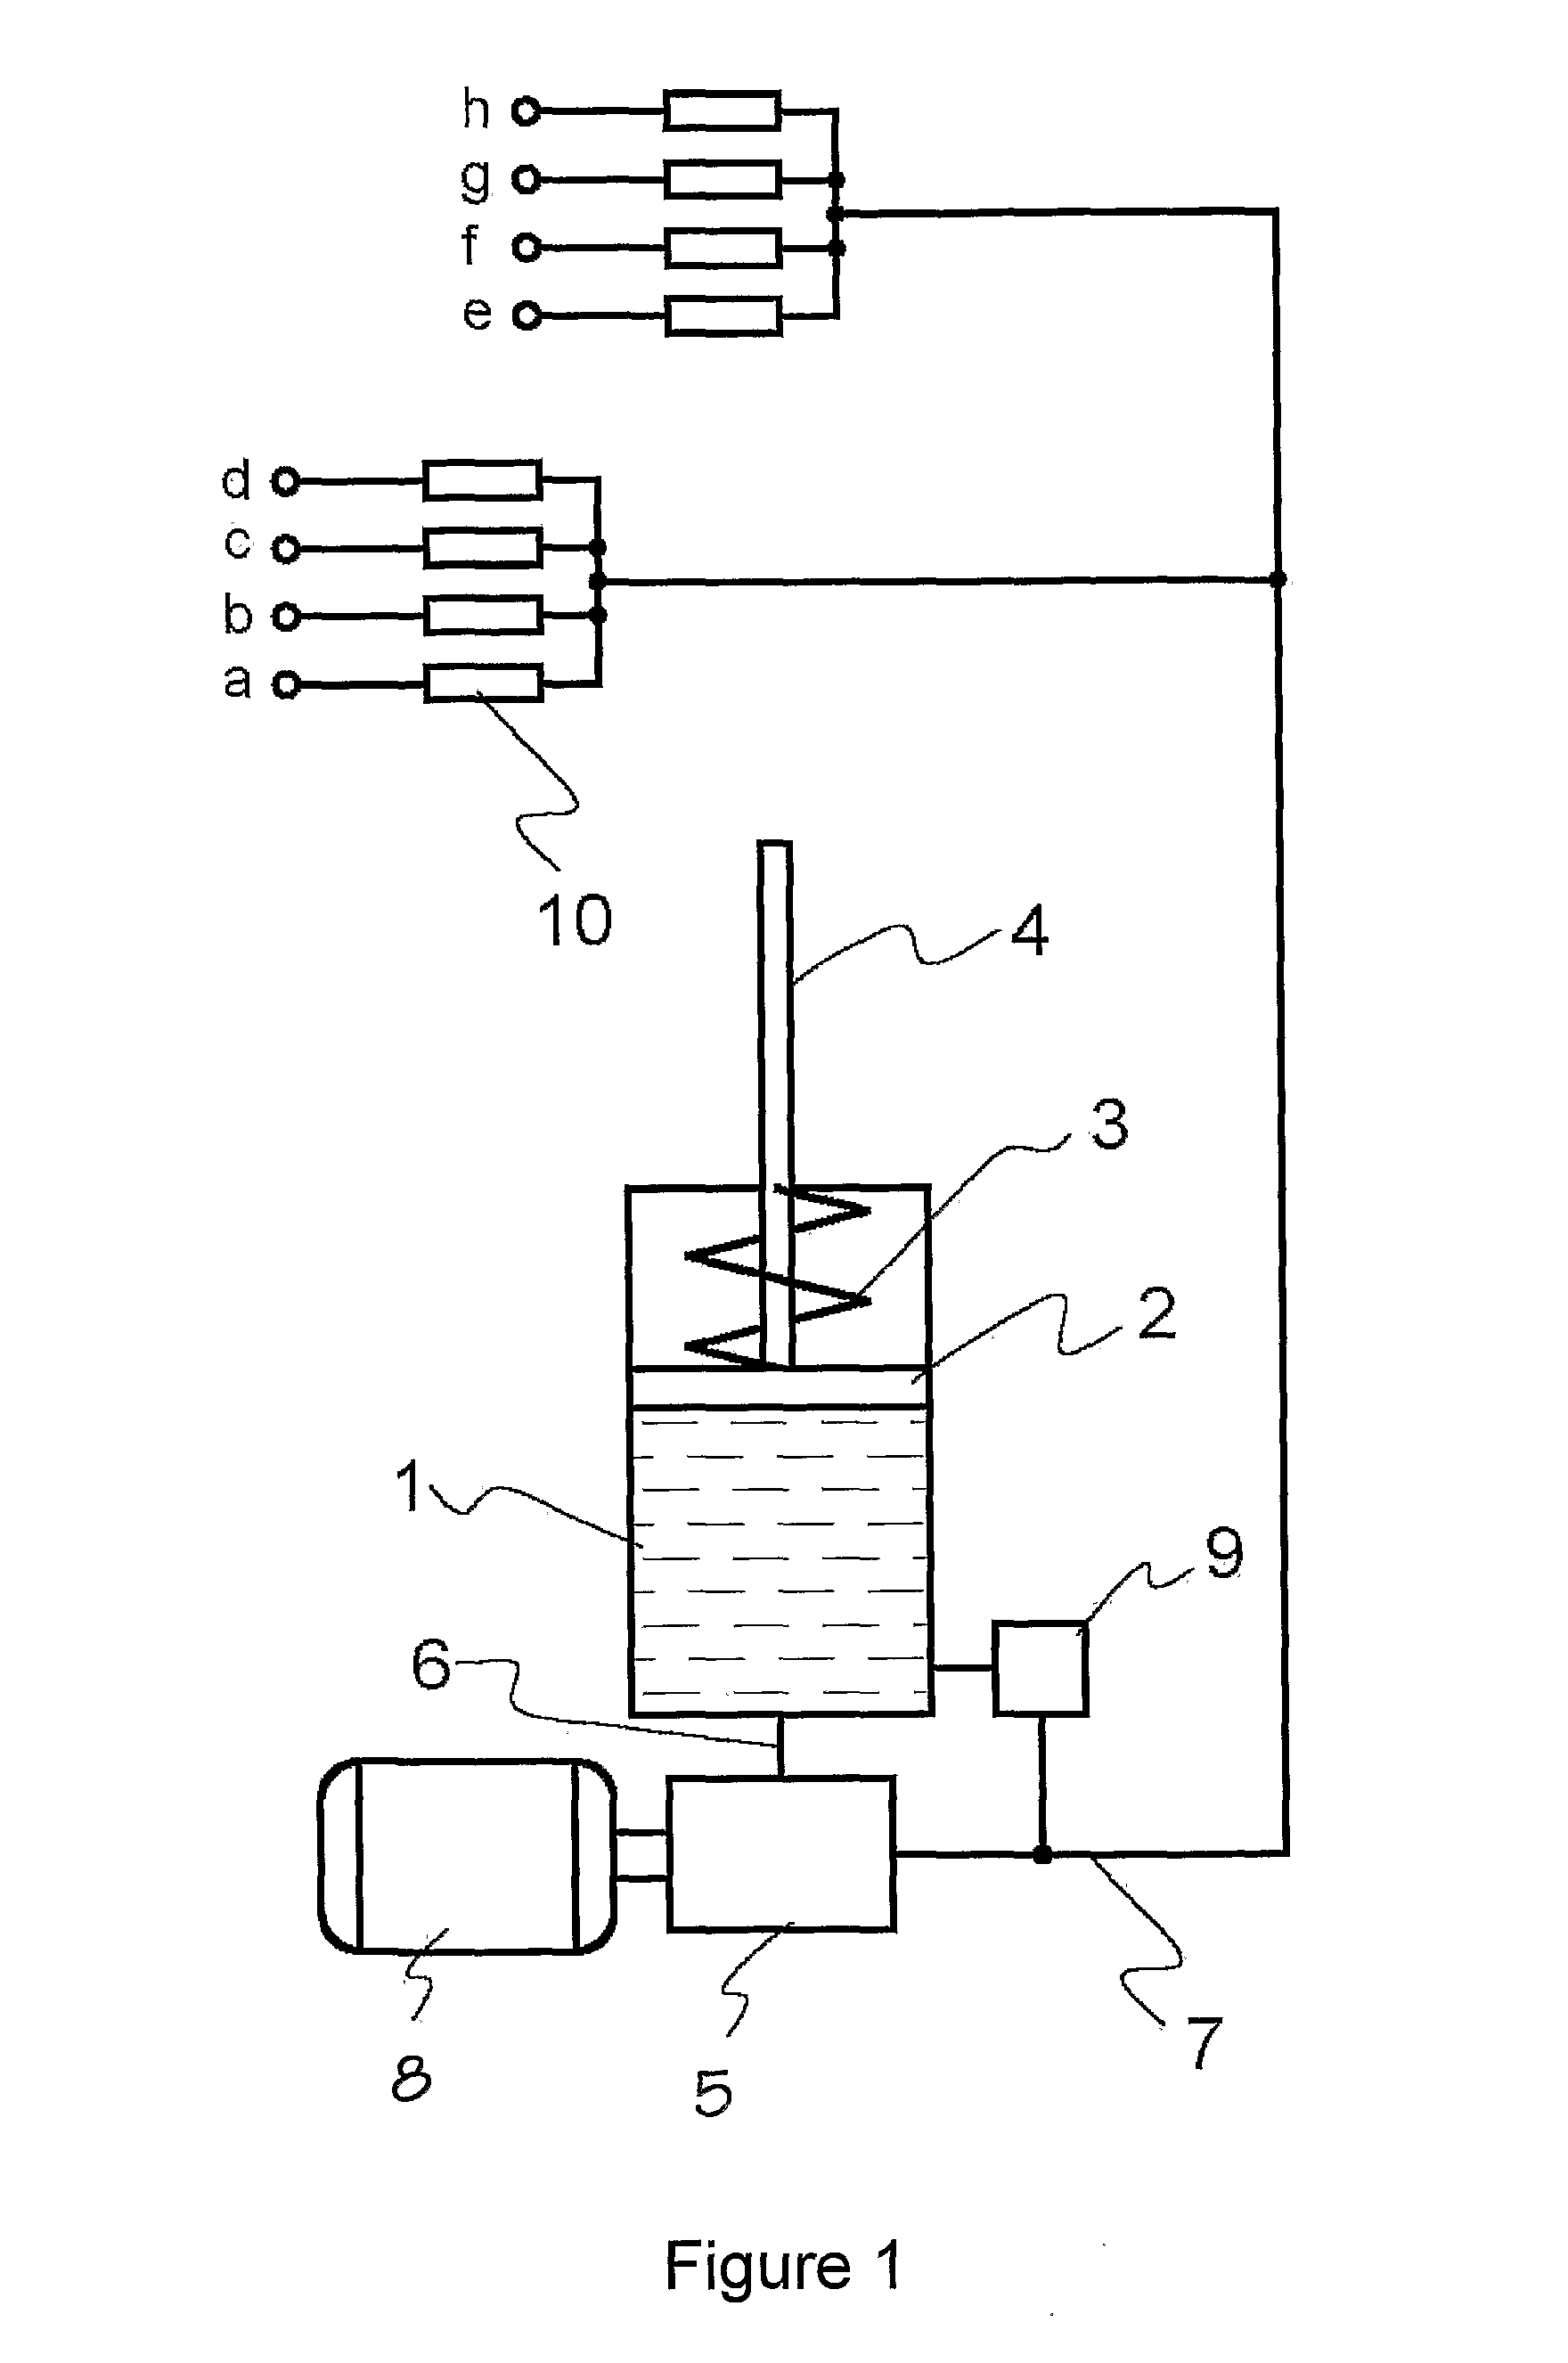 Method and apparatus for purging air from automatic lubrication systems